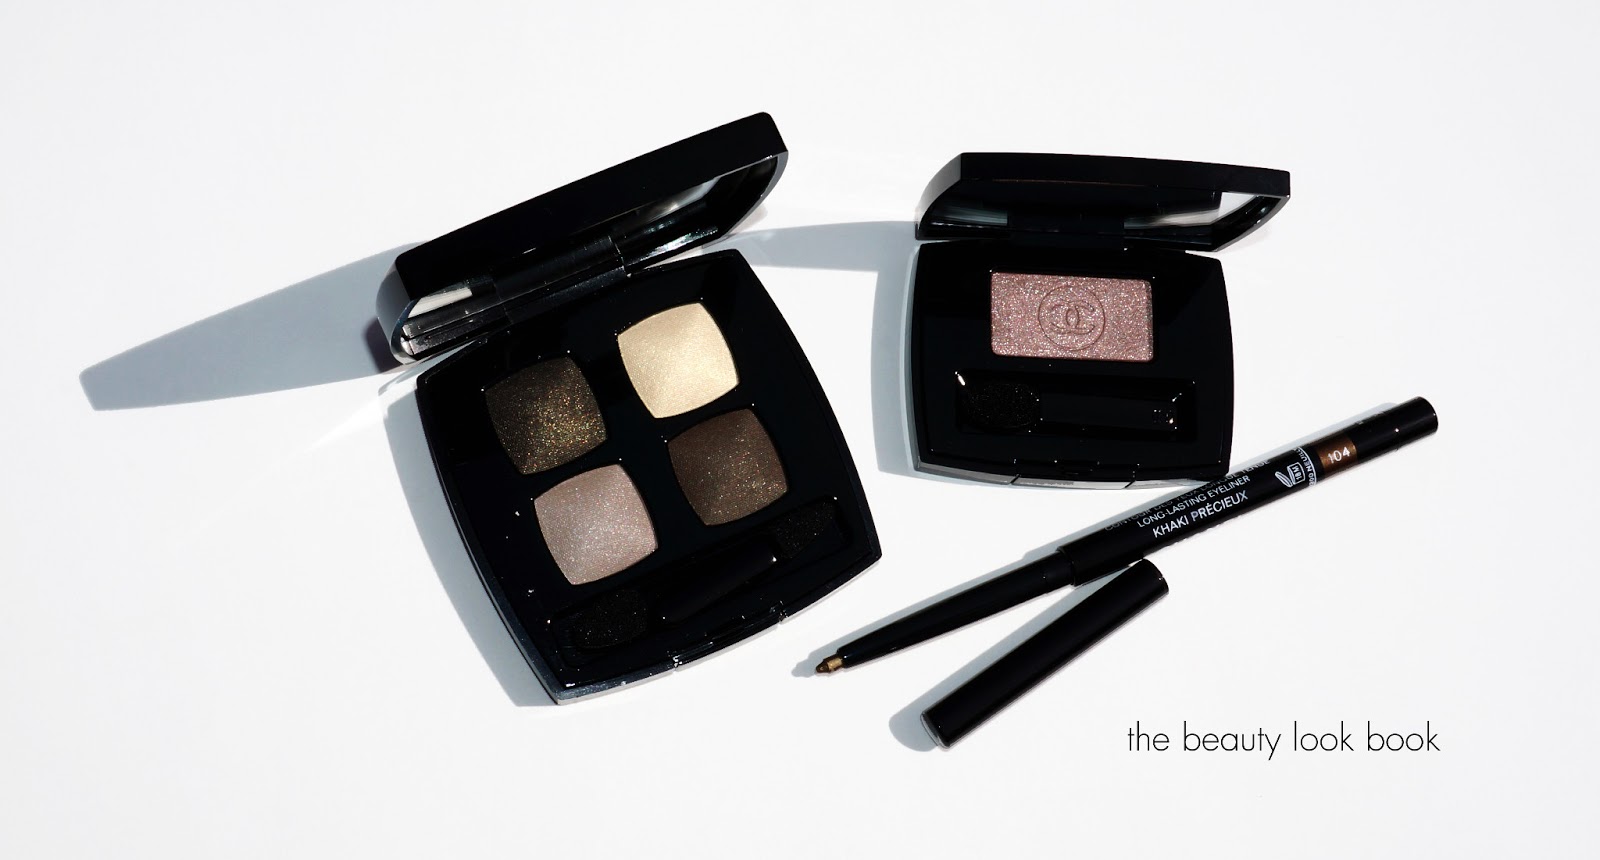 Chanel Les 4 Ombres Quadra Eye Shadow in Dunes Review